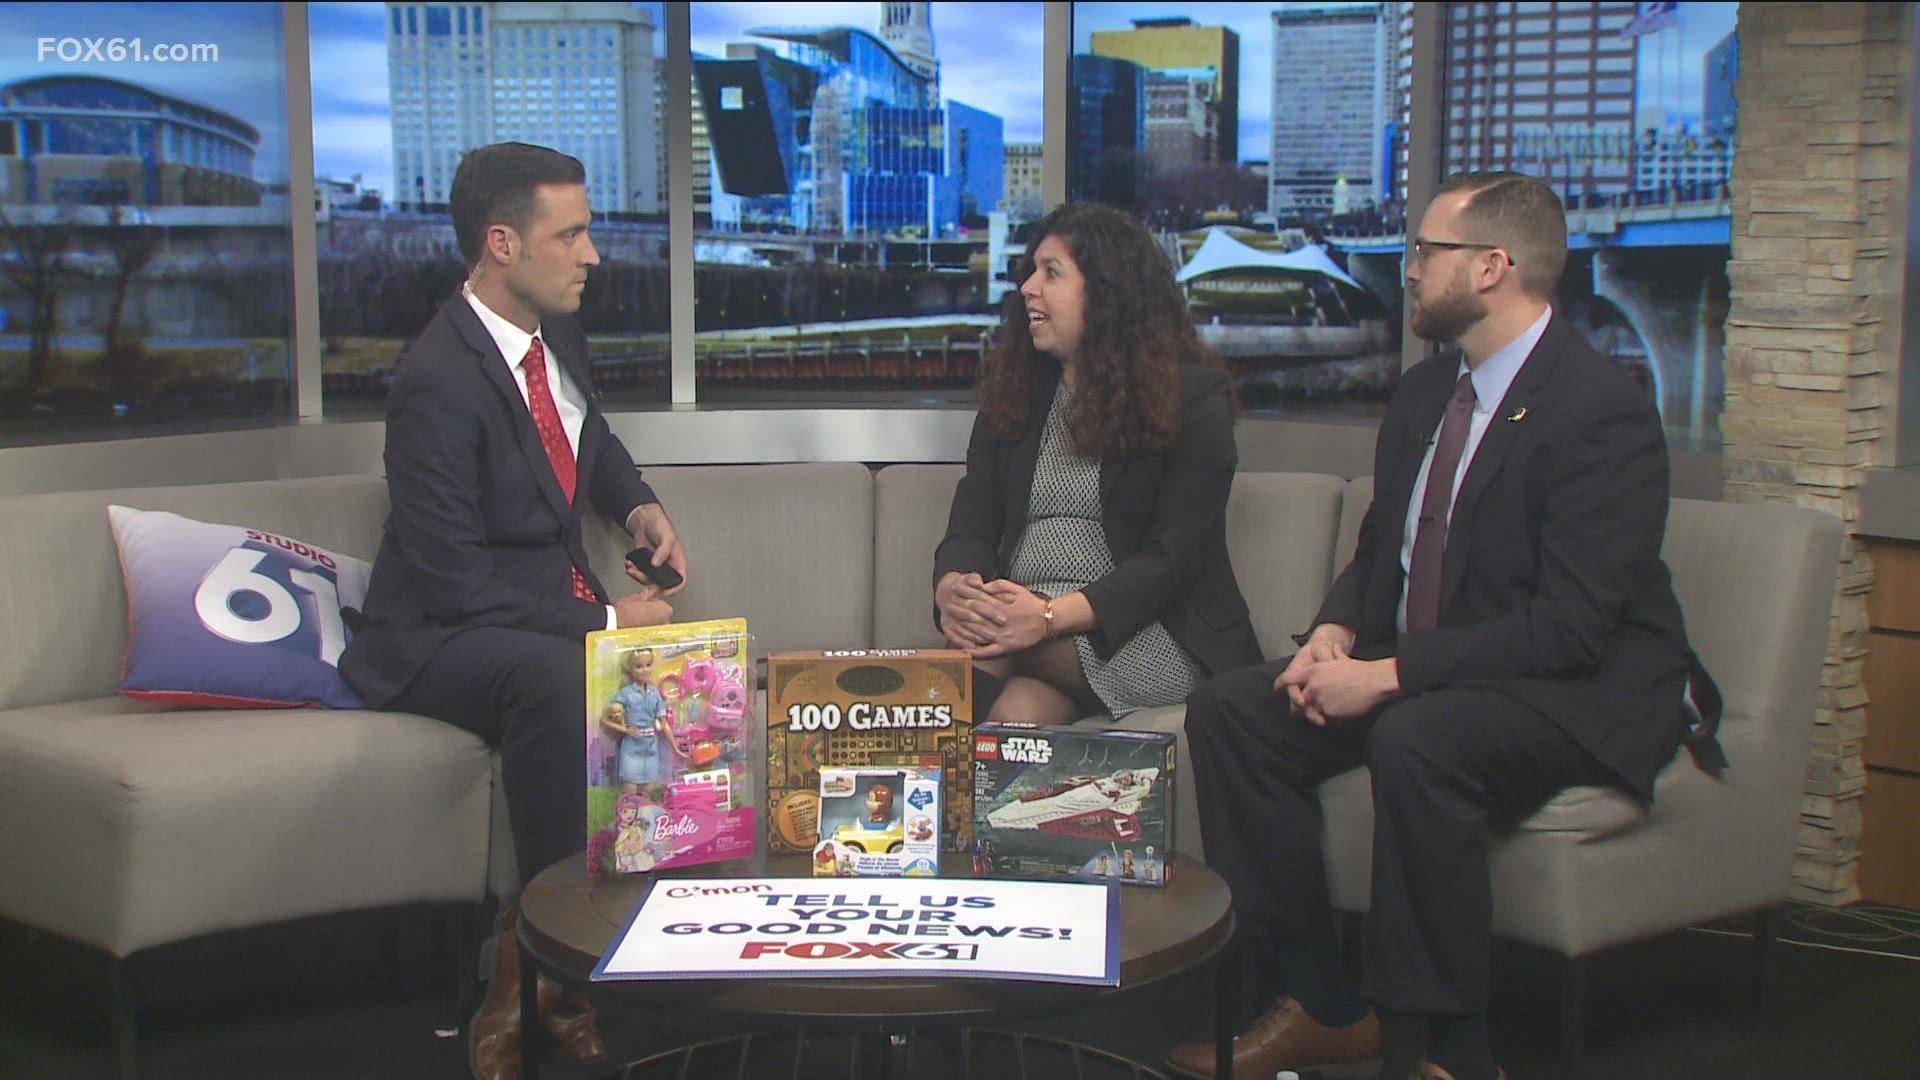 Connecticut Lottery and Connecticut Children's give an update on the Give a Child a Toy, Not a Ticket toy drive for young patients receiving treatment.